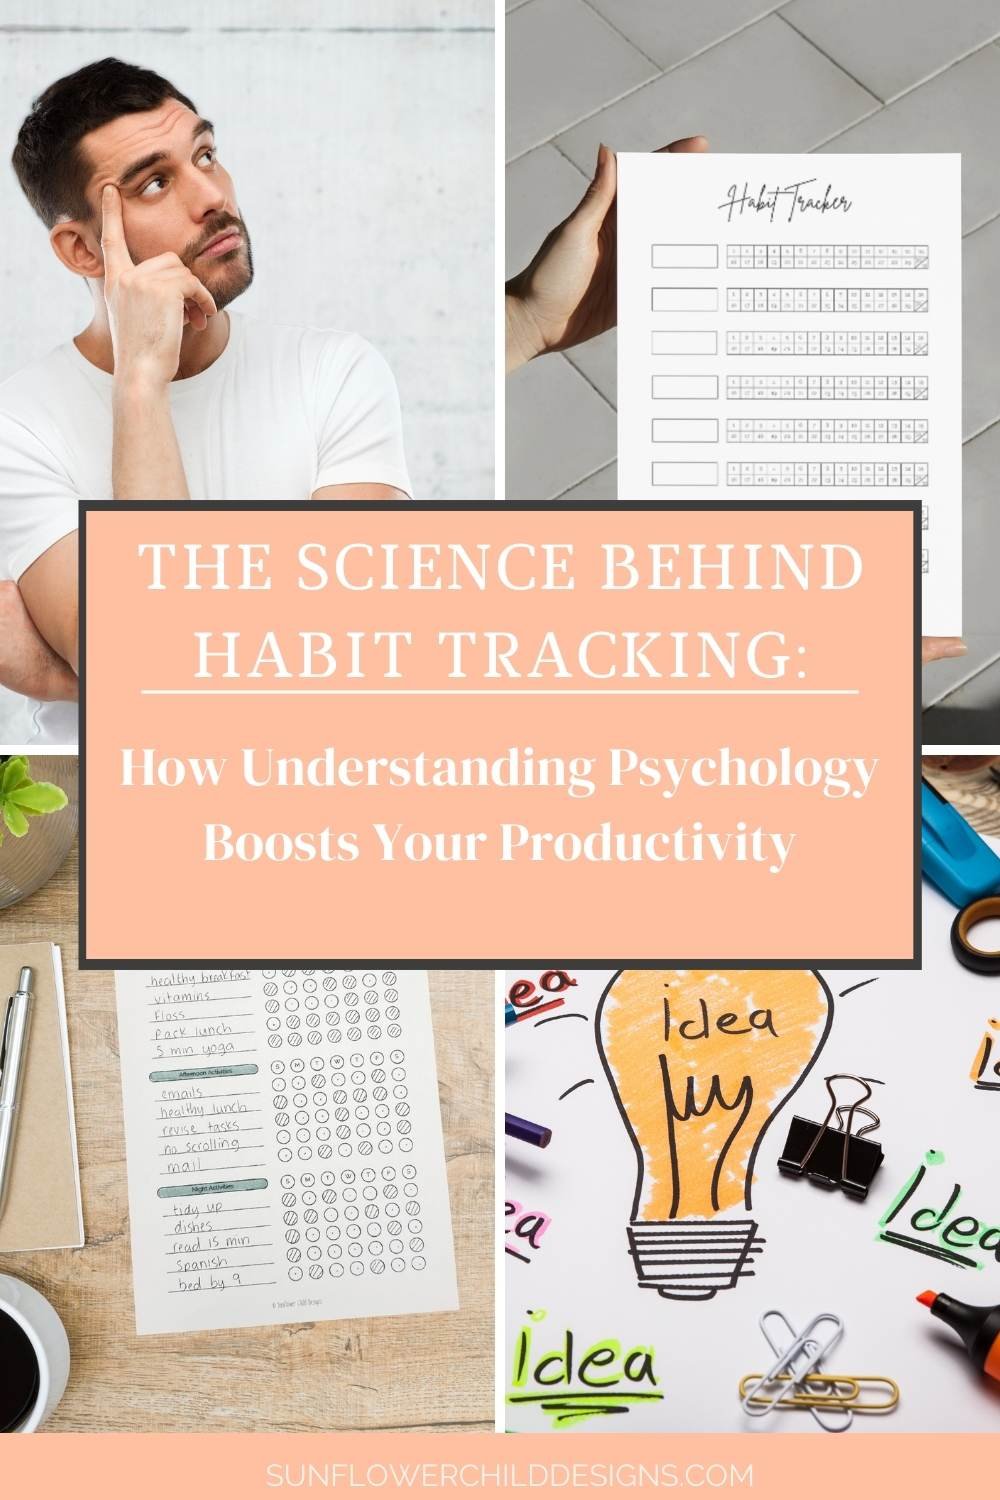 Uncover the psychology of habit tracking! Dive deep into "The Science Behind Habit Tracking" to boost your productivity. Understand how rewards, feedback loops, and resilience play key roles. 